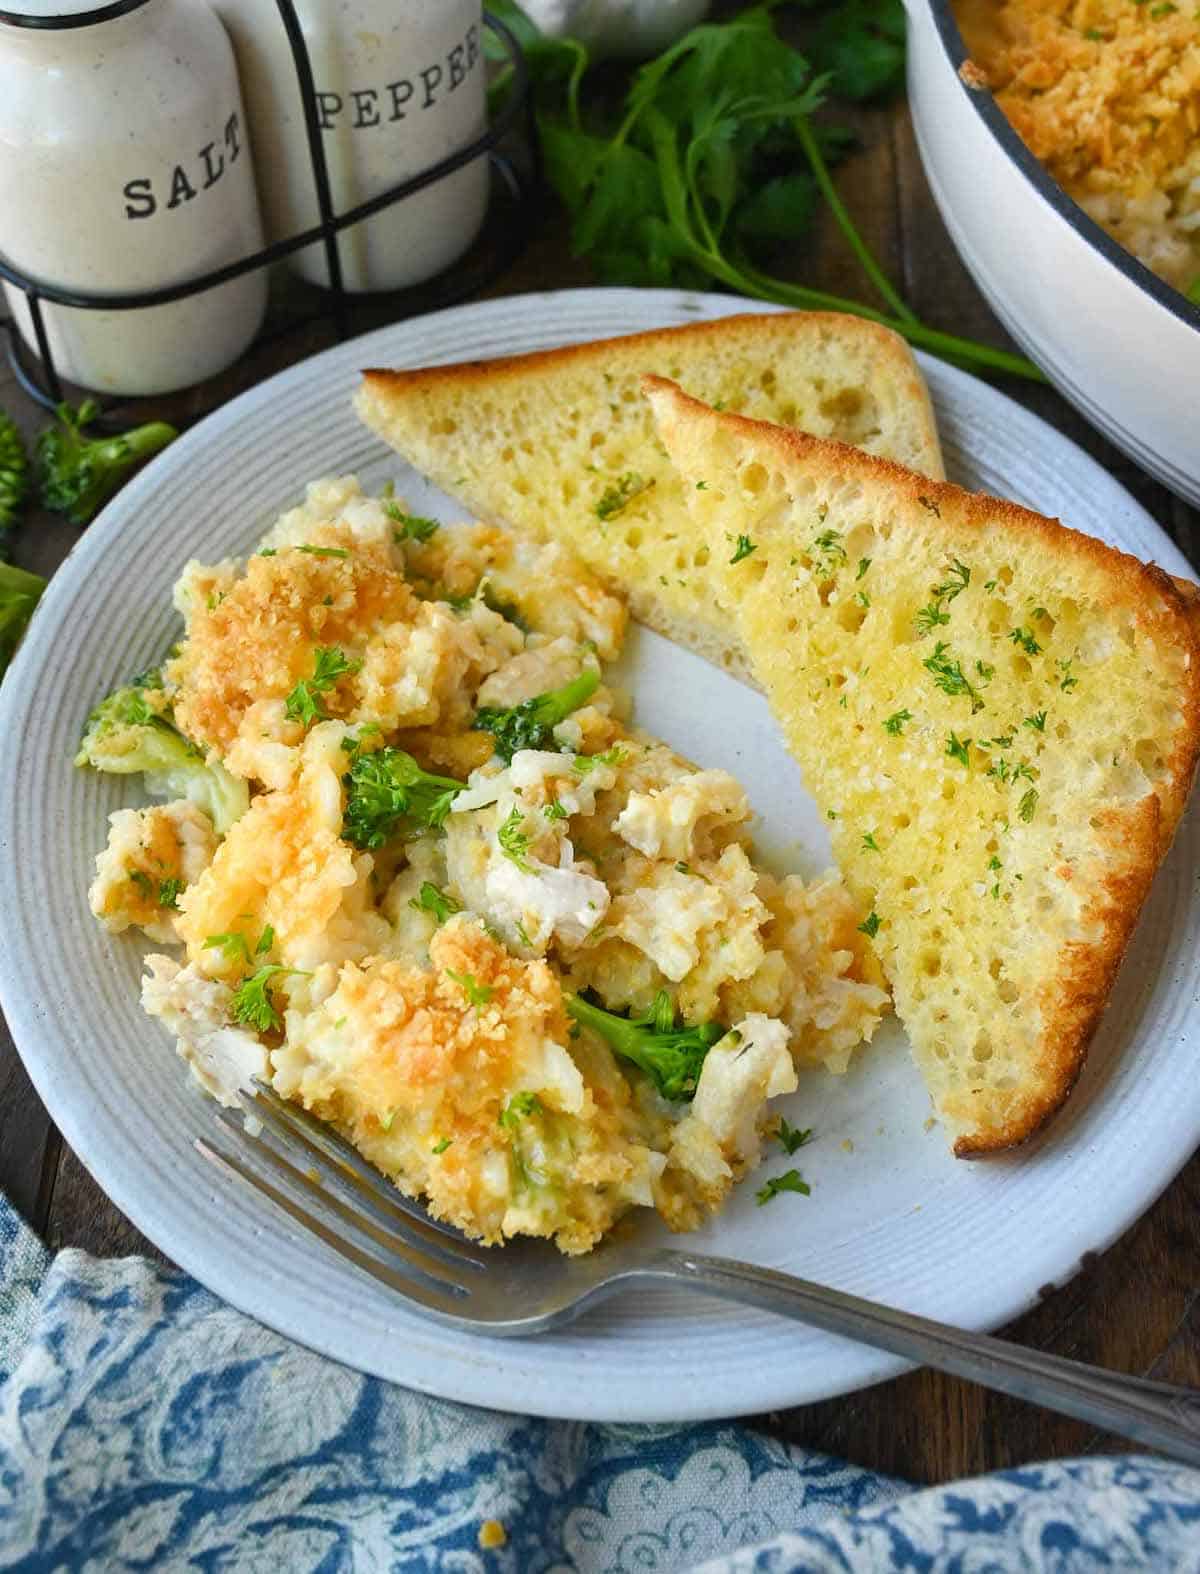 A serving of chicken broccoli casserole on a plate with a side of garlic bread.